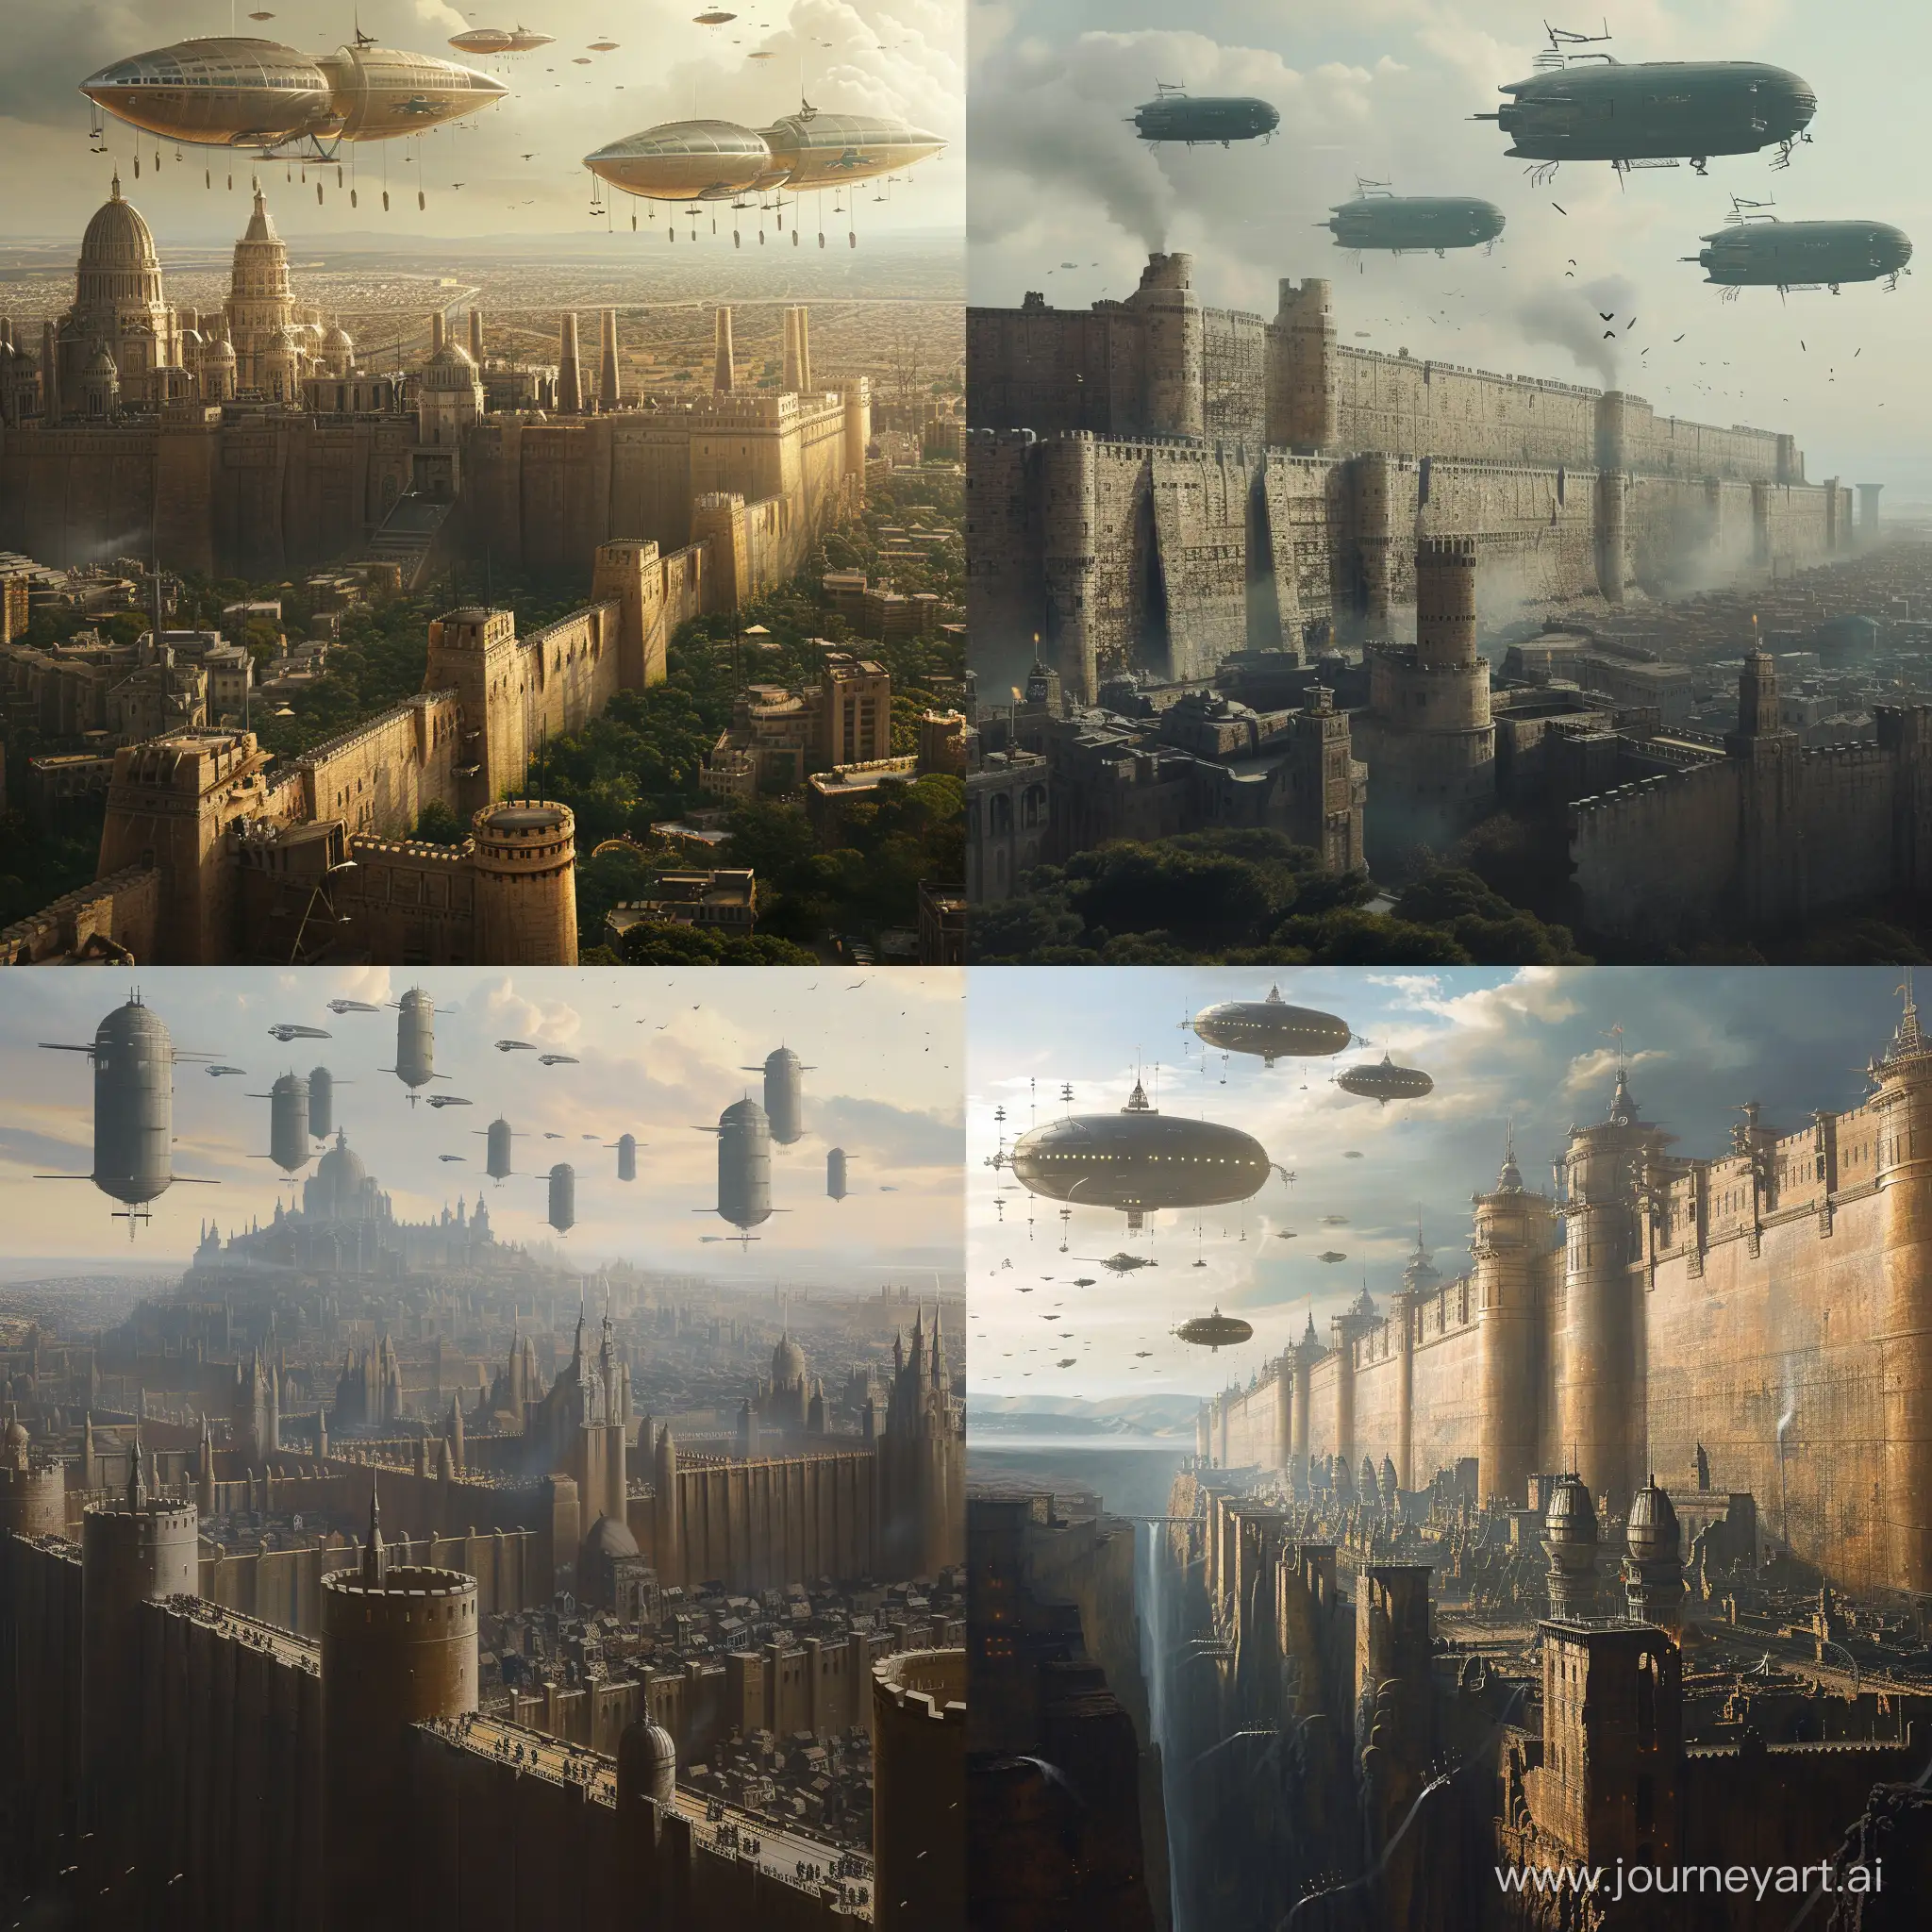 Impenetrable-City-Walls-Defended-by-Airships-in-the-20th-Century